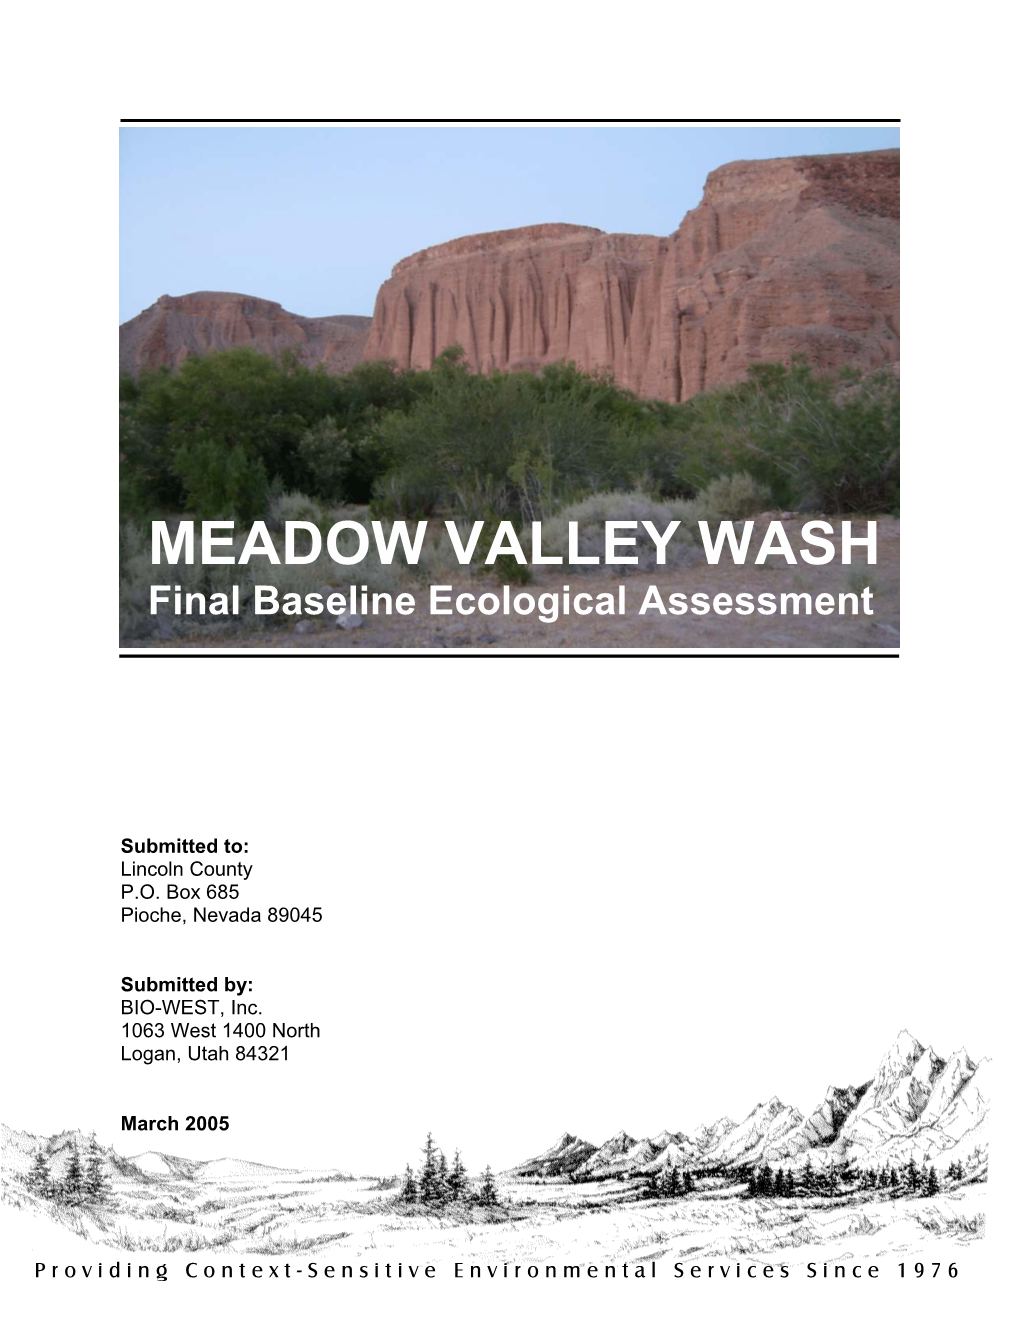 R:\Meadow Valley Wash\Report\Final Report\Revised MVW Report.Wpd